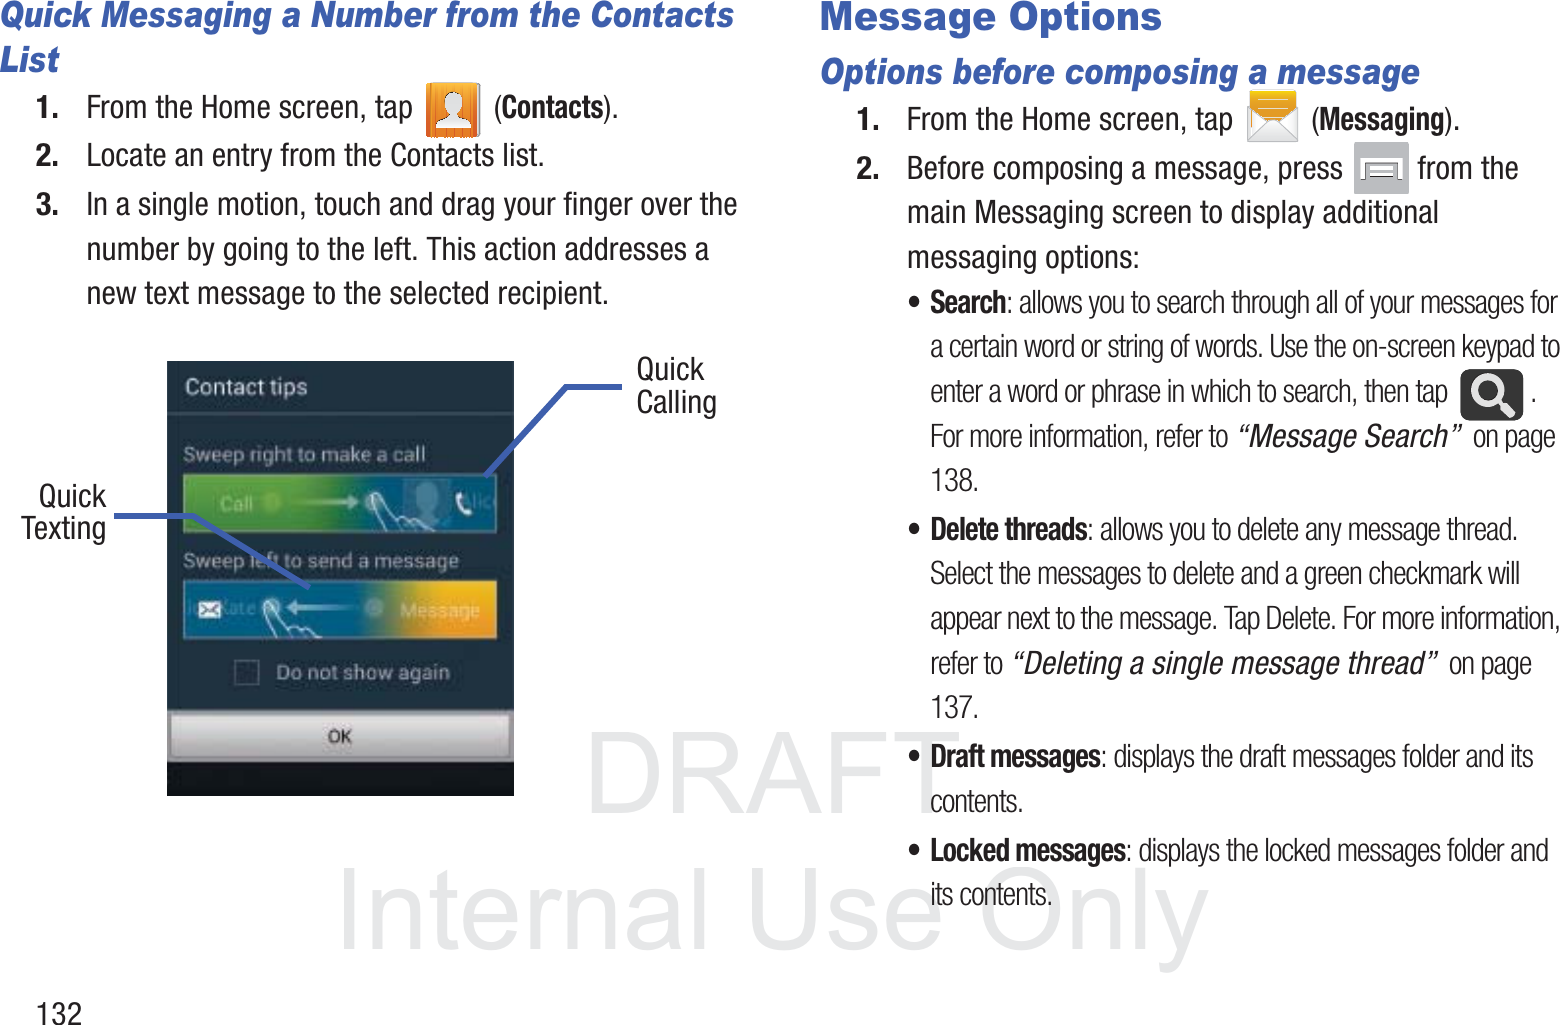 DRAFT InternalUse Only132Quick Messaging a Number from the Contacts List1. From the Home screen, tap   (Contacts). 2. Locate an entry from the Contacts list.3. In a single motion, touch and drag your finger over the number by going to the left. This action addresses a new text message to the selected recipient.    Message Options Options before composing a message1. From the Home screen, tap  (Messaging).2. Before composing a message, press   from the main Messaging screen to display additional messaging options:•Search: allows you to search through all of your messages for a certain word or string of words. Use the on-screen keypad to enter a word or phrase in which to search, then tap  . For more information, refer to “Message Search”  on page 138.• Delete threads: allows you to delete any message thread. Select the messages to delete and a green checkmark will appear next to the message. Tap Delete. For more information, refer to “Deleting a single message thread”  on page 137.•Draft messages: displays the draft messages folder and its contents.• Locked messages: displays the locked messages folder and its contents.QuickQuickTextingCalling